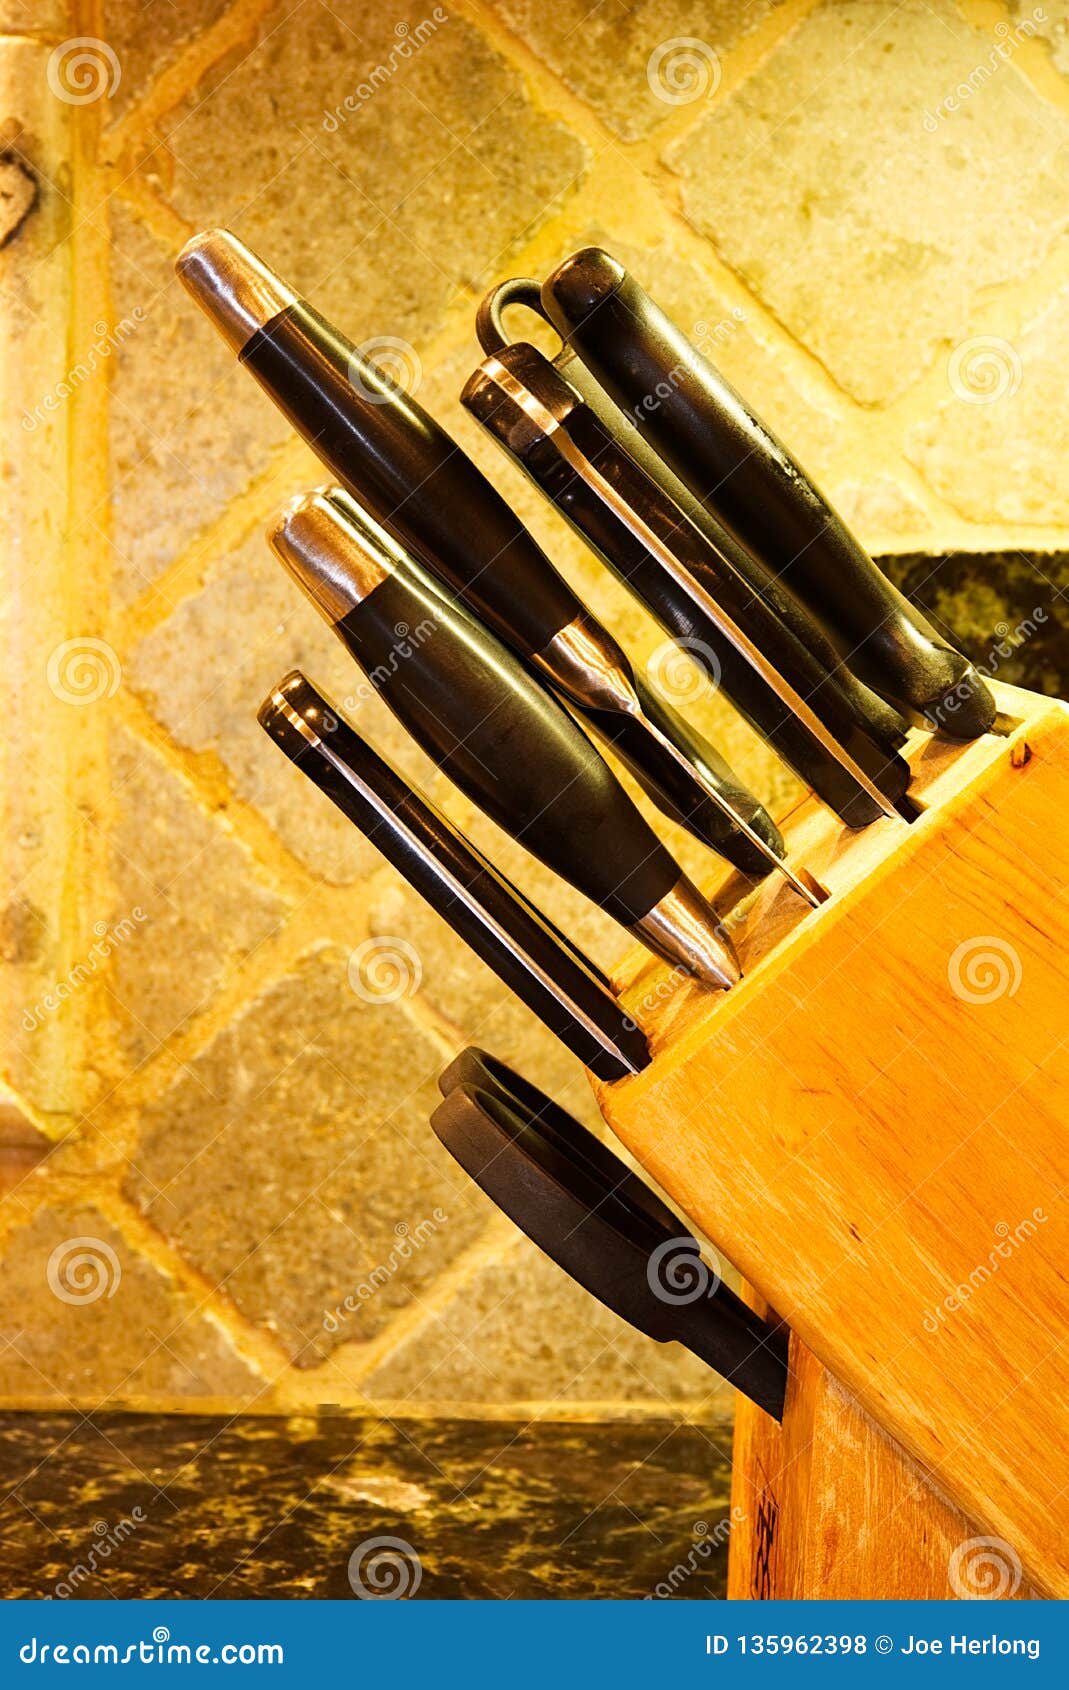 Closeup Of A Wooden Block Full Of Kitchen Knives On A Granite